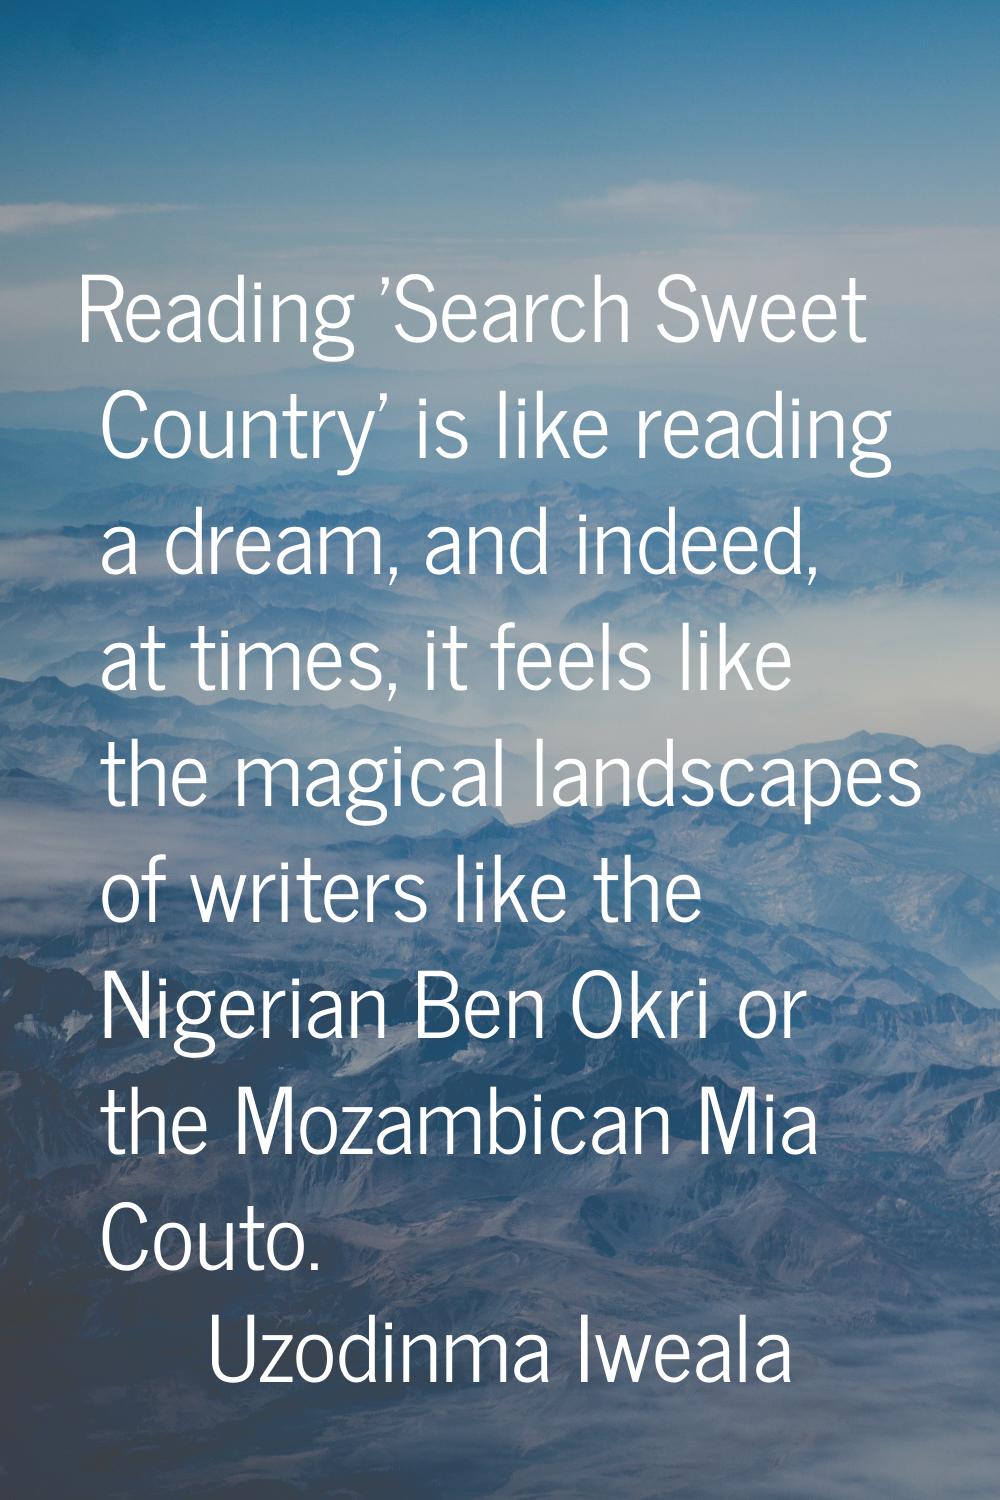 Reading 'Search Sweet Country' is like reading a dream, and indeed, at times, it feels like the mag